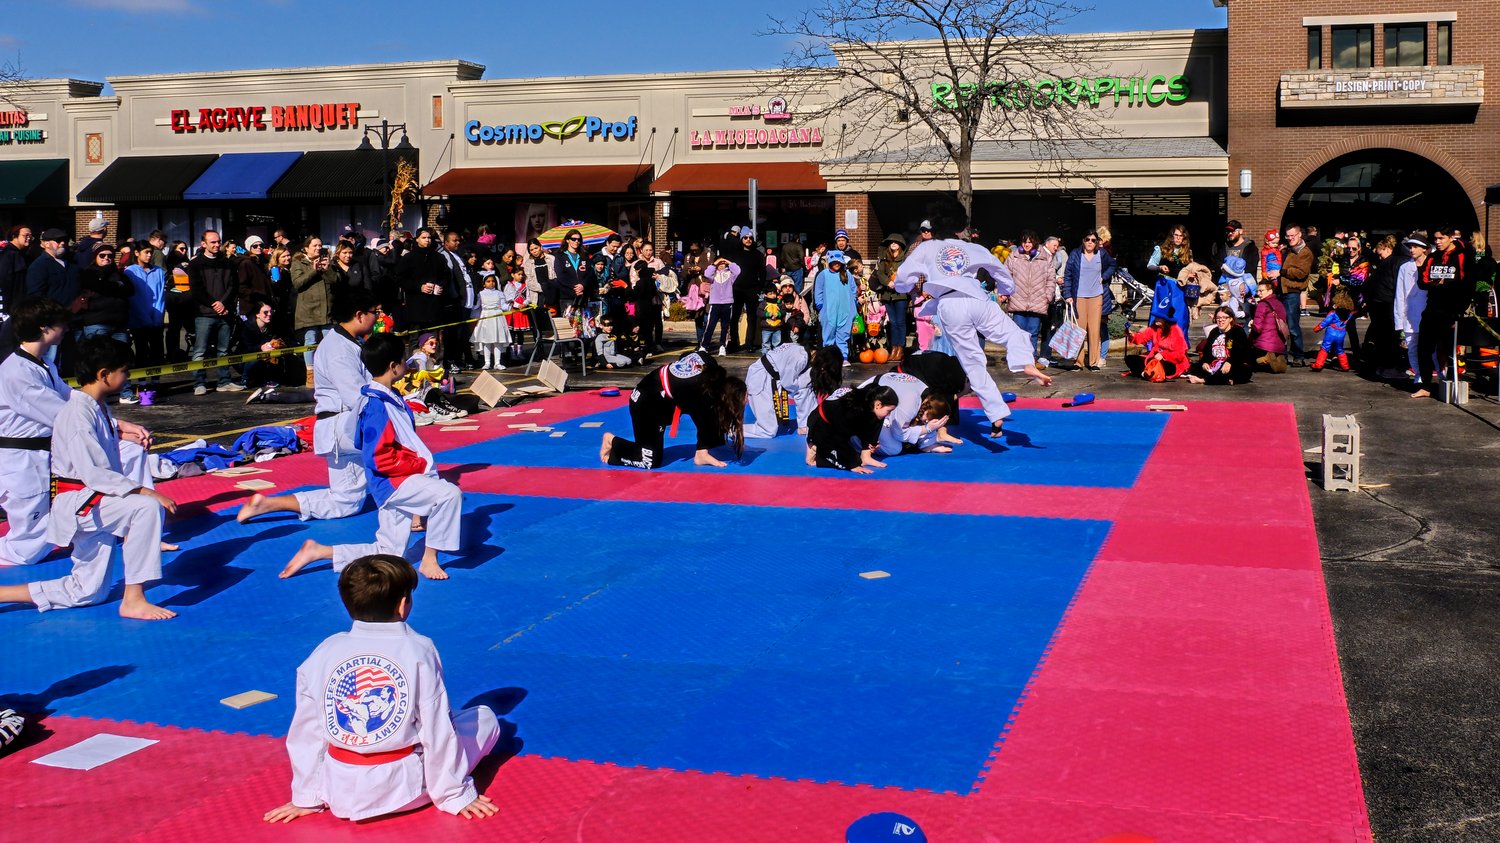 Lee's Martial Arts Demo team performing for the crowd.